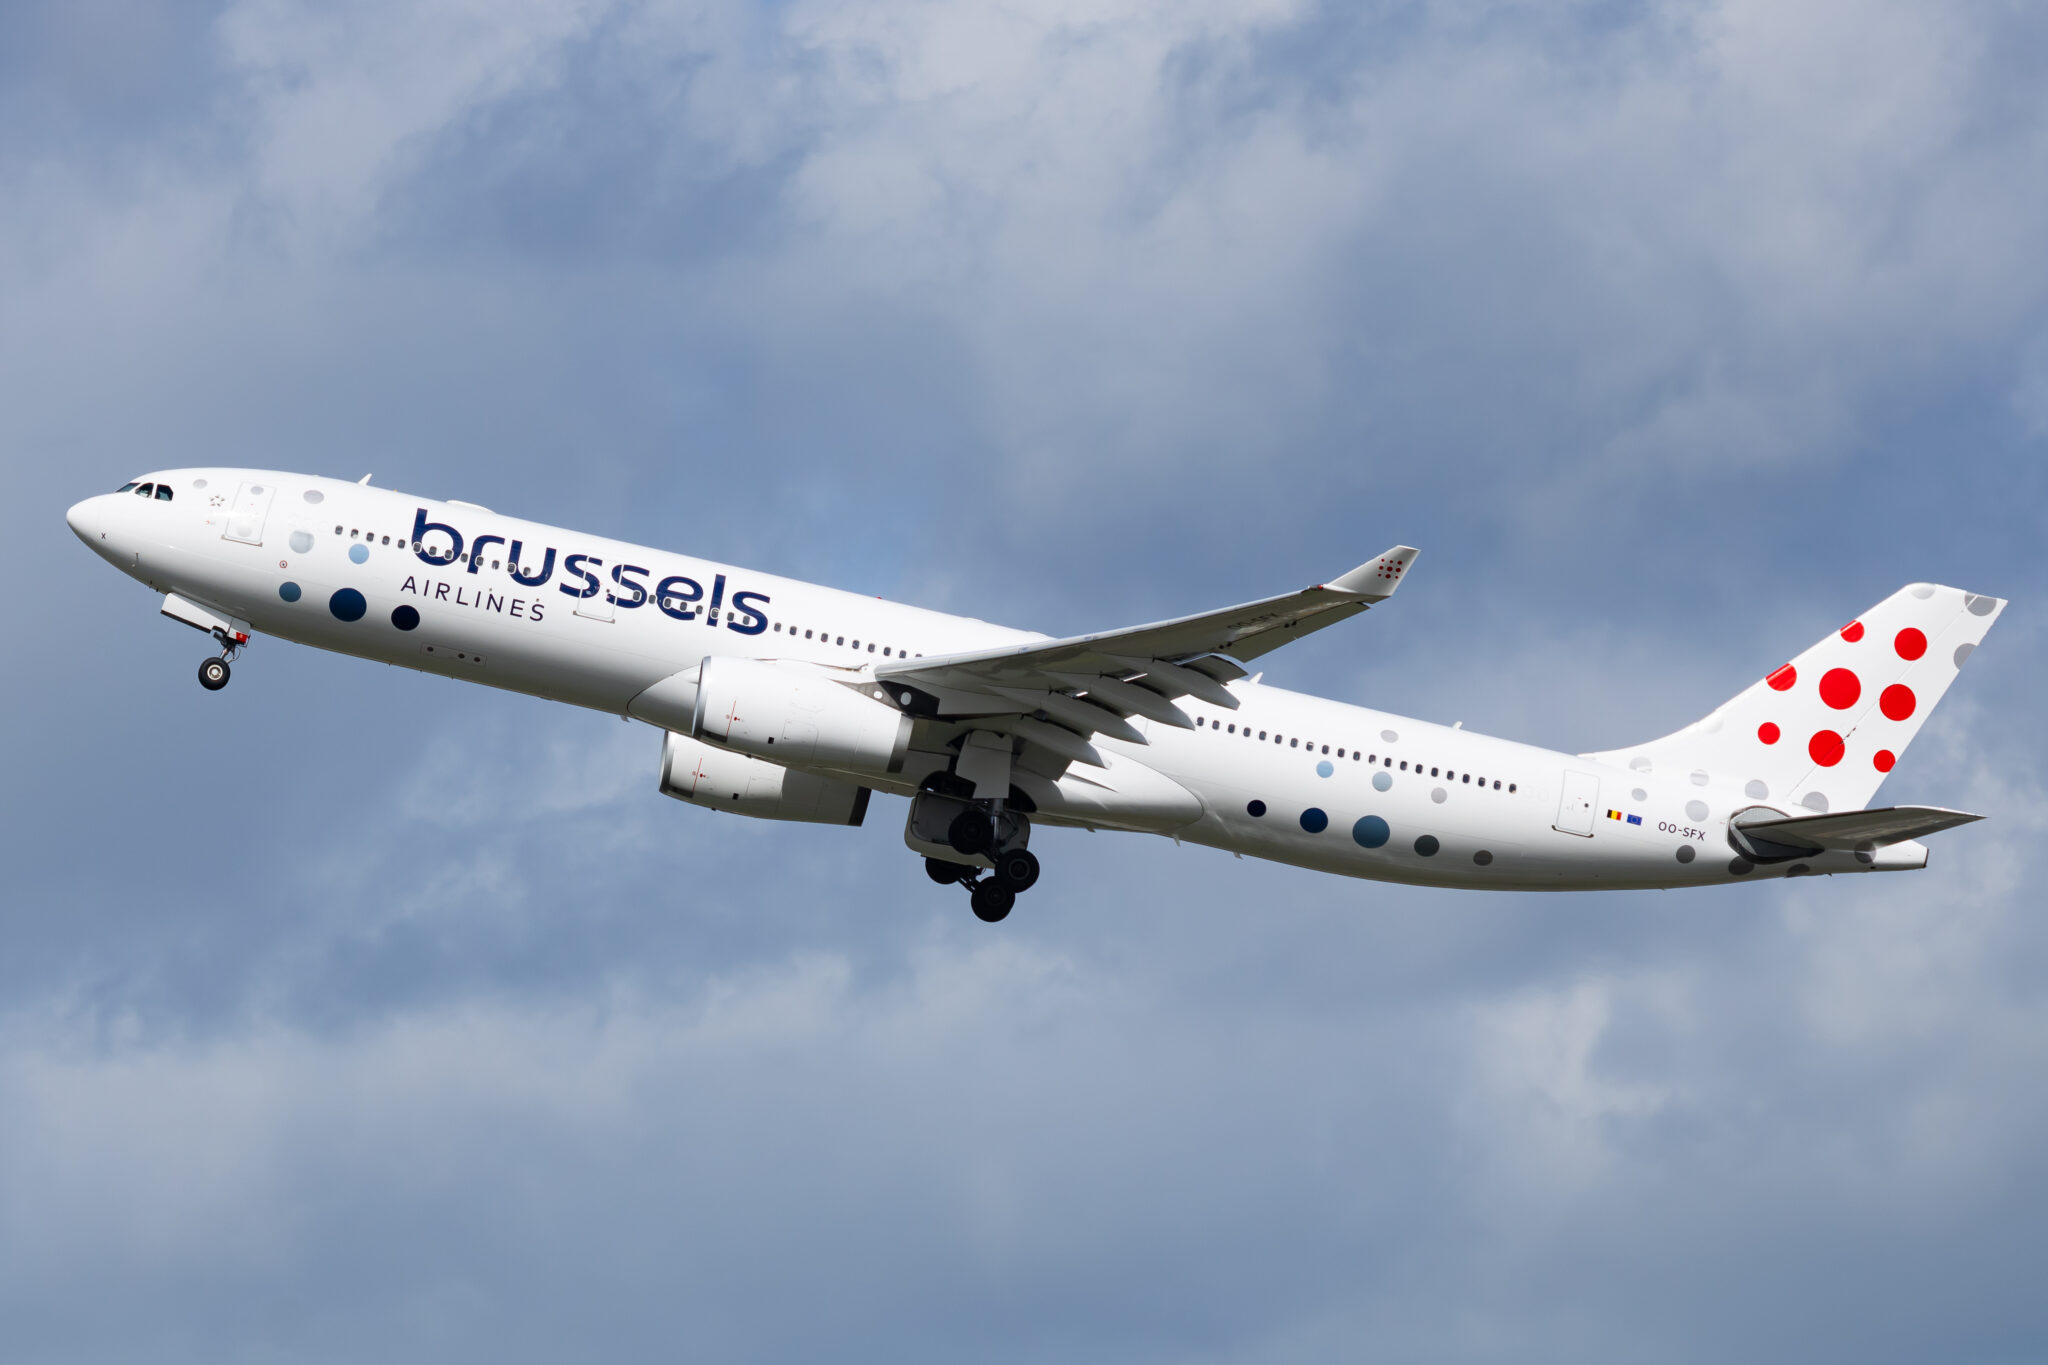 13 Facts About Brussels Airlines - Facts.net